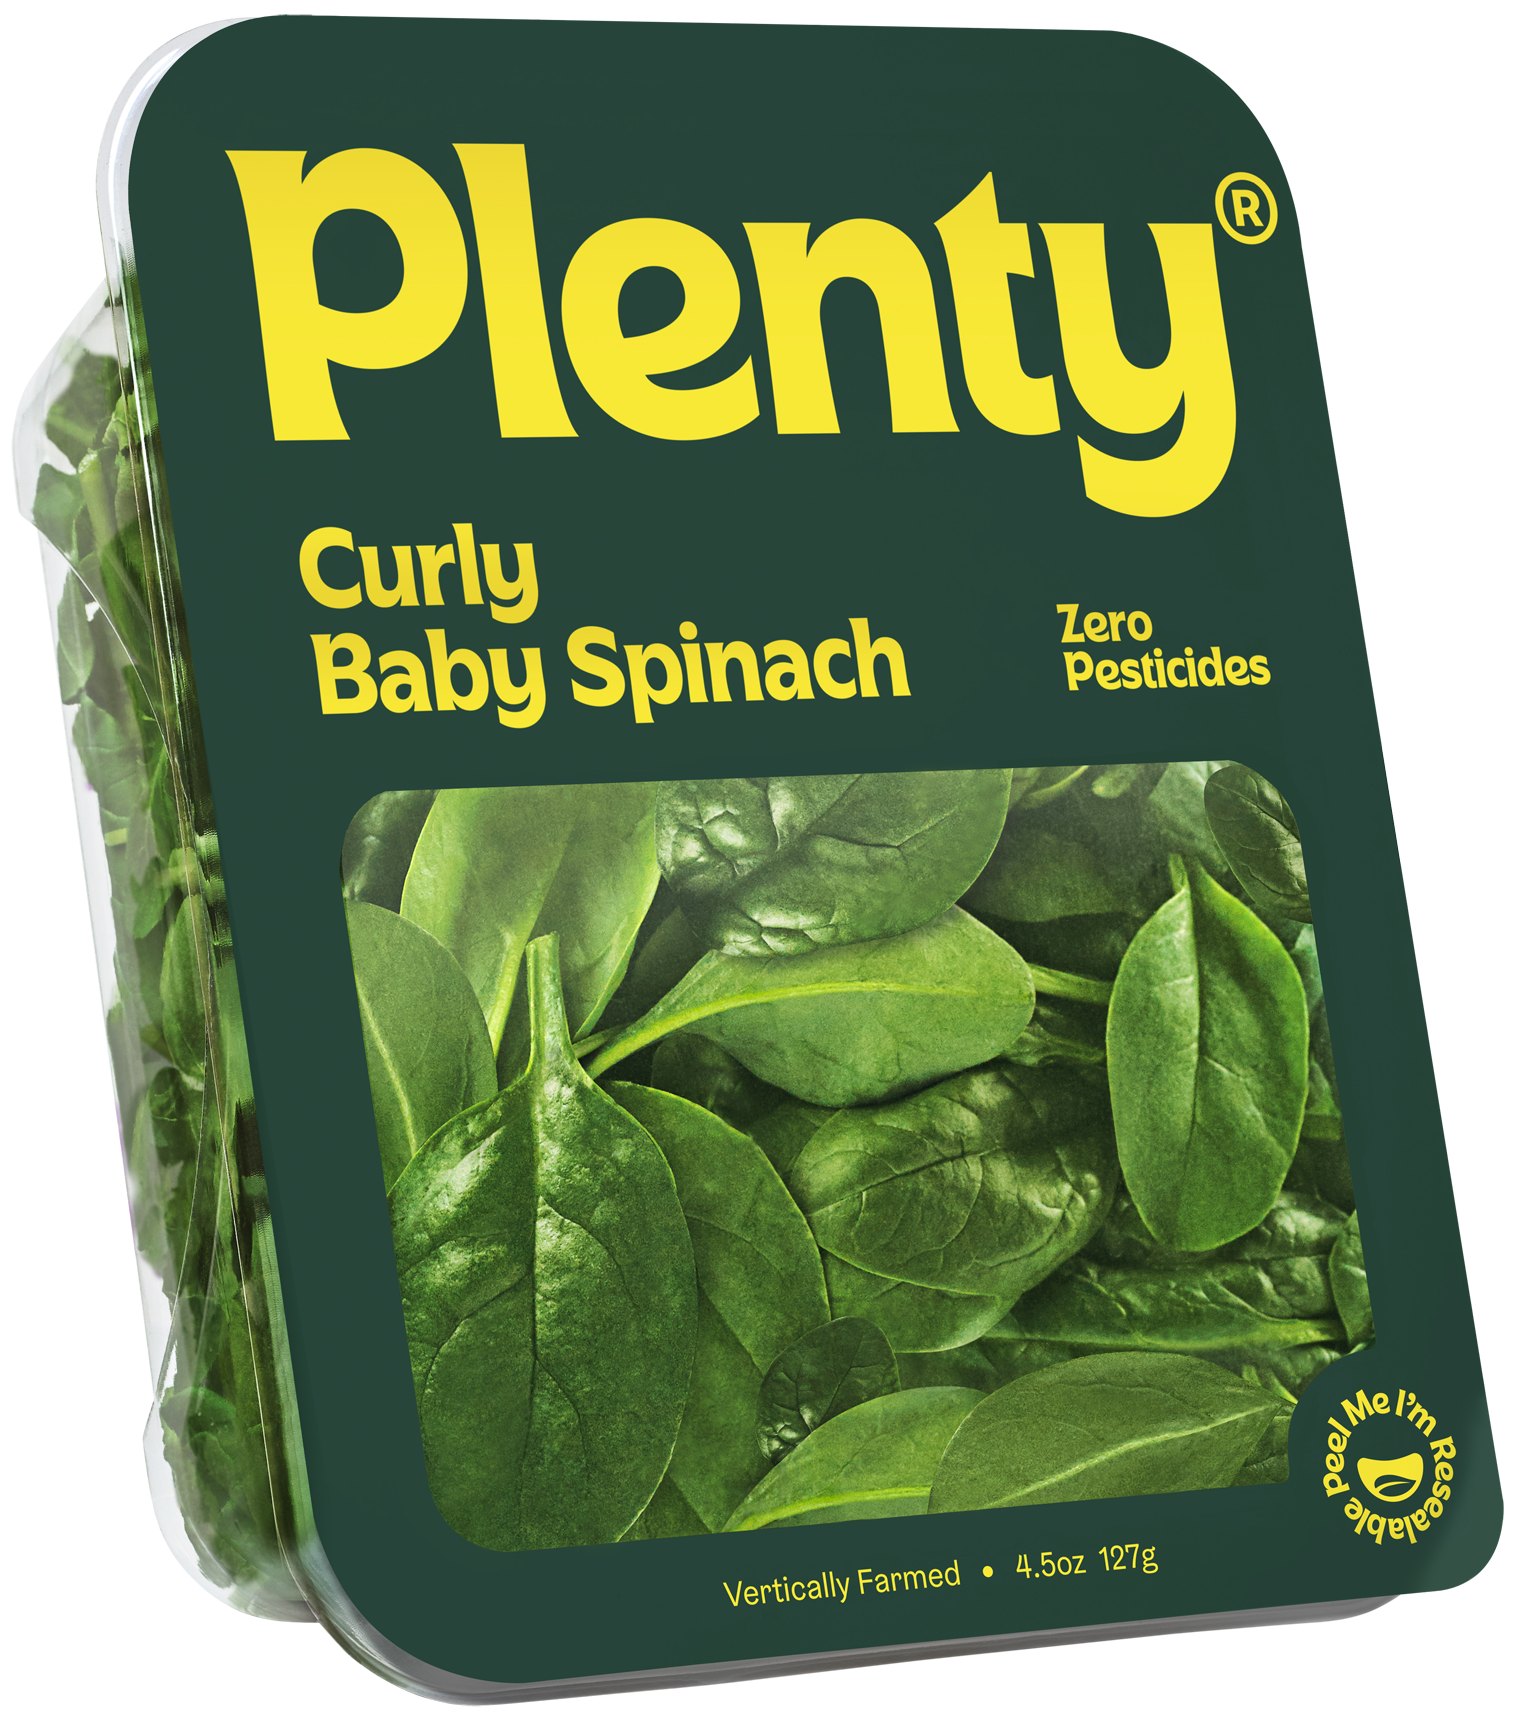 Curly_Baby_Spinach_4.5oz_3_4 angle_No_Reflections